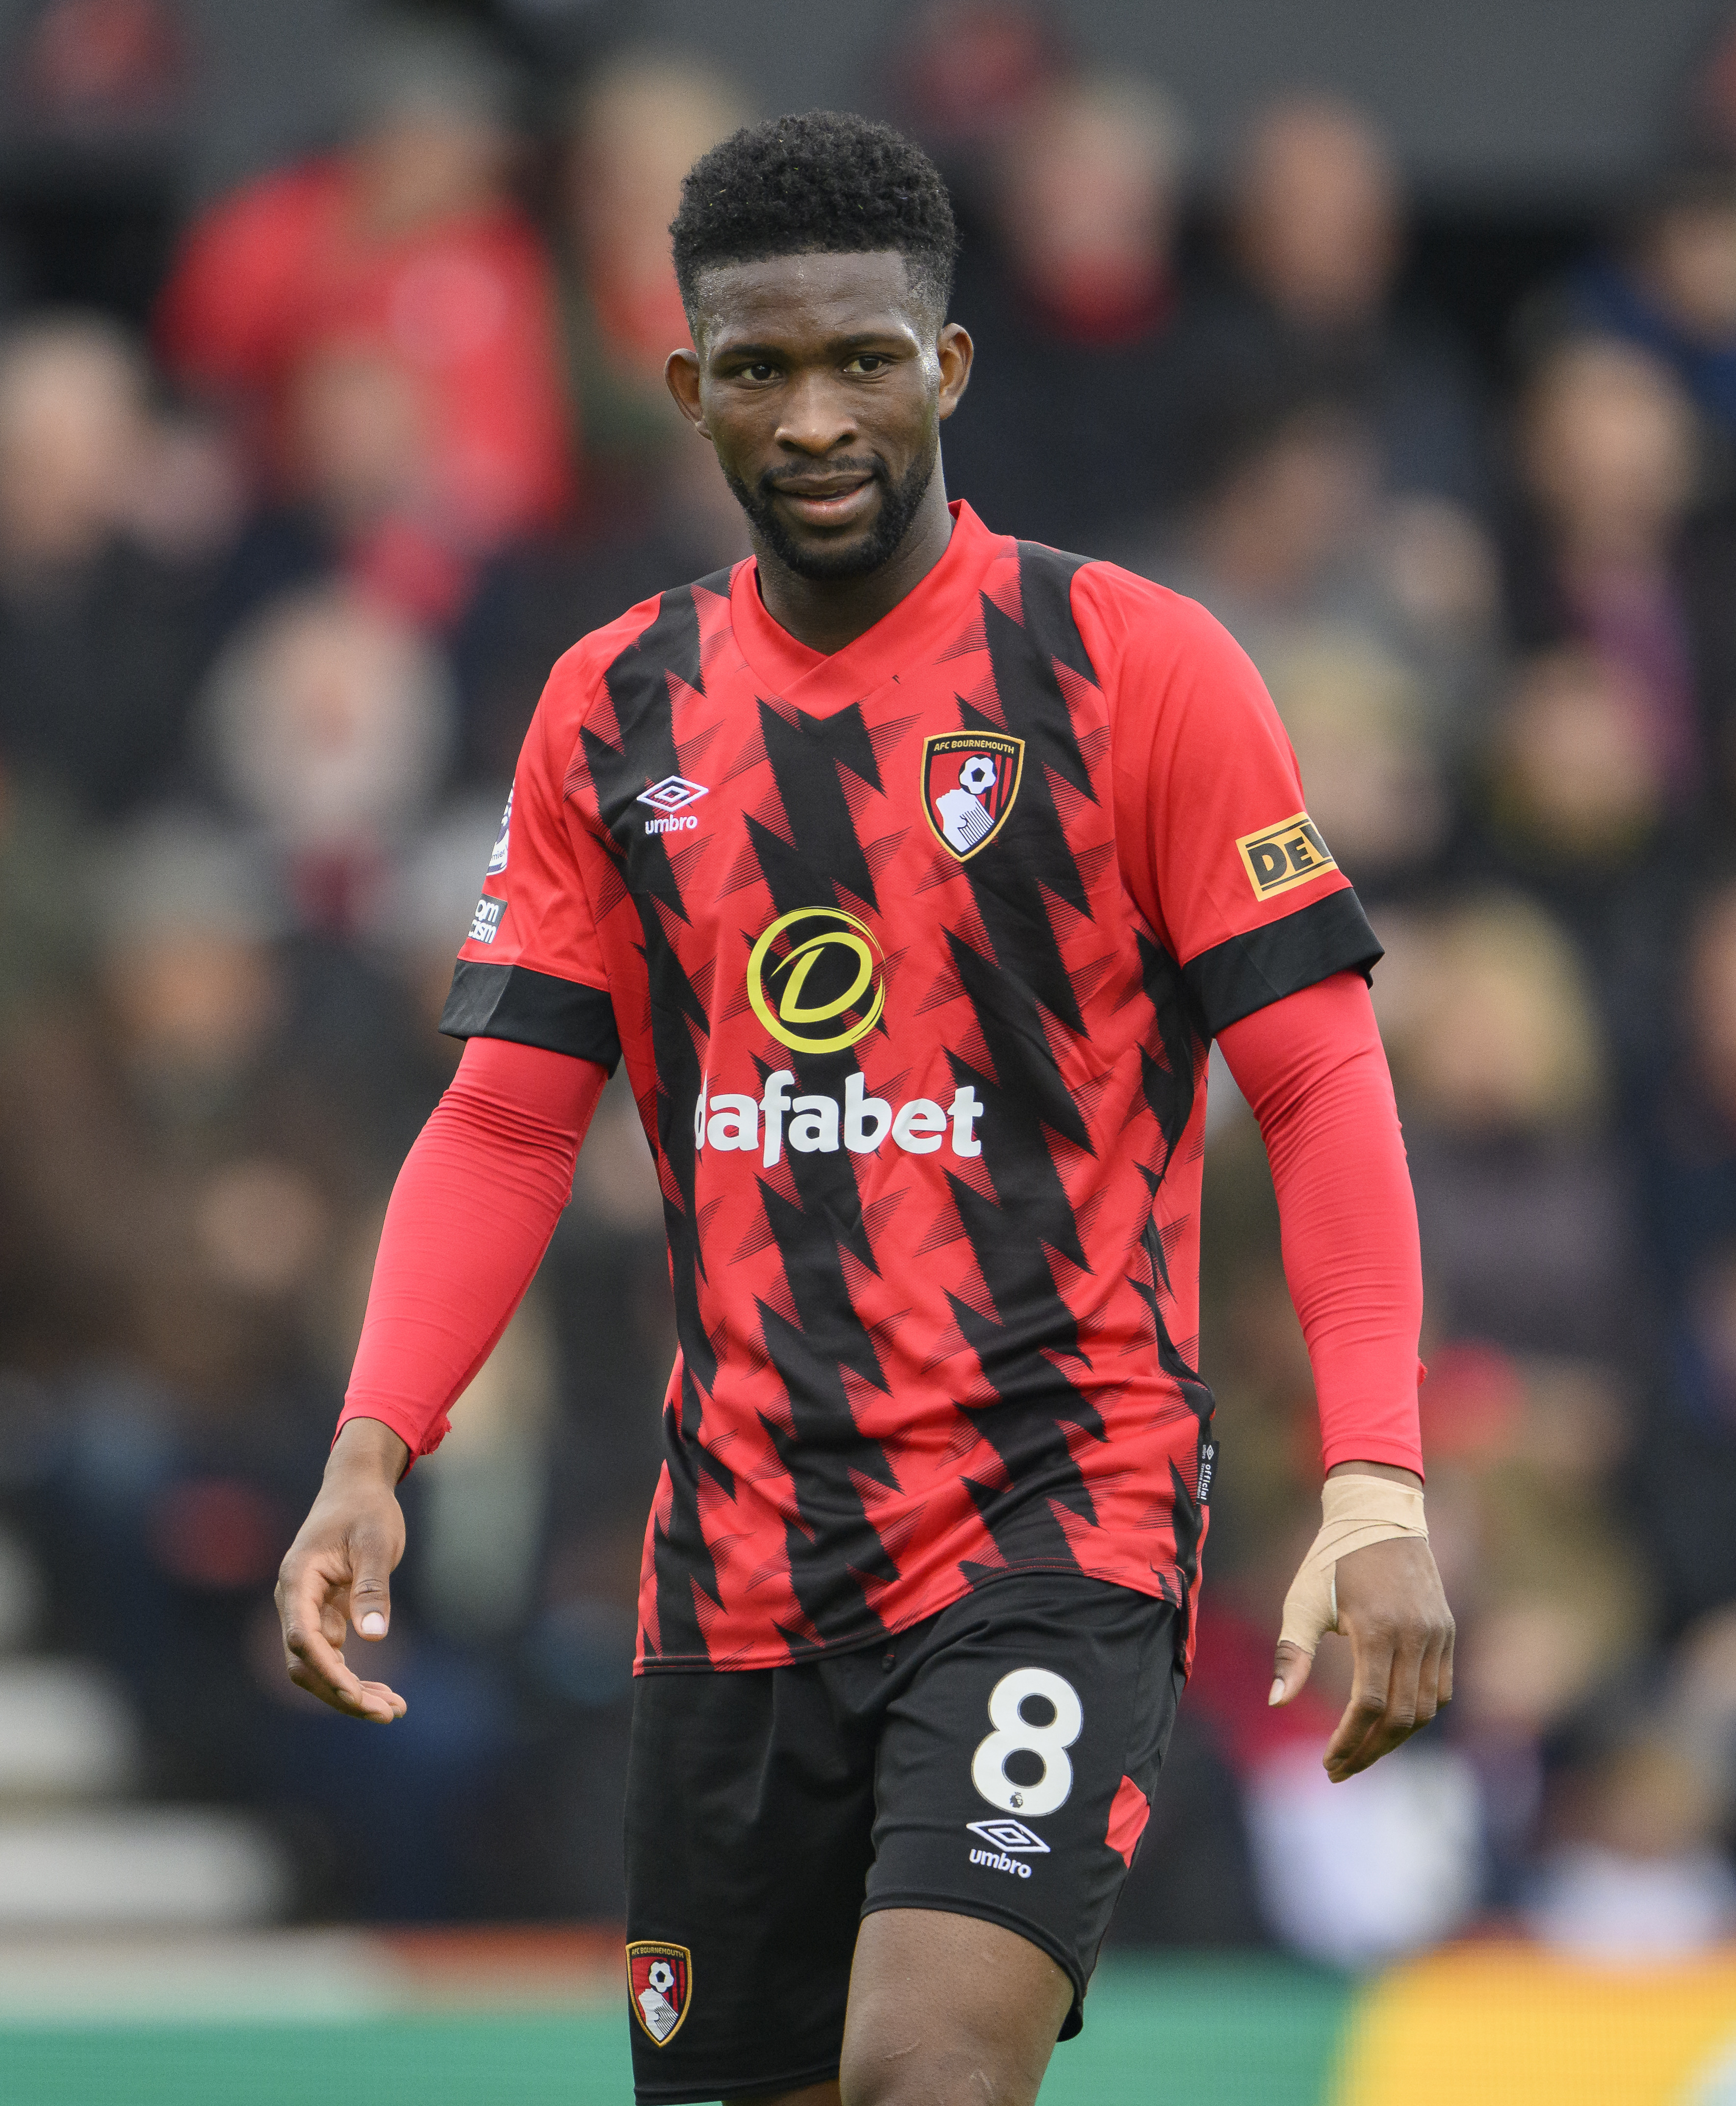 Bournemouth star Jefferson Lerma set for free transfer to Crystal Palace